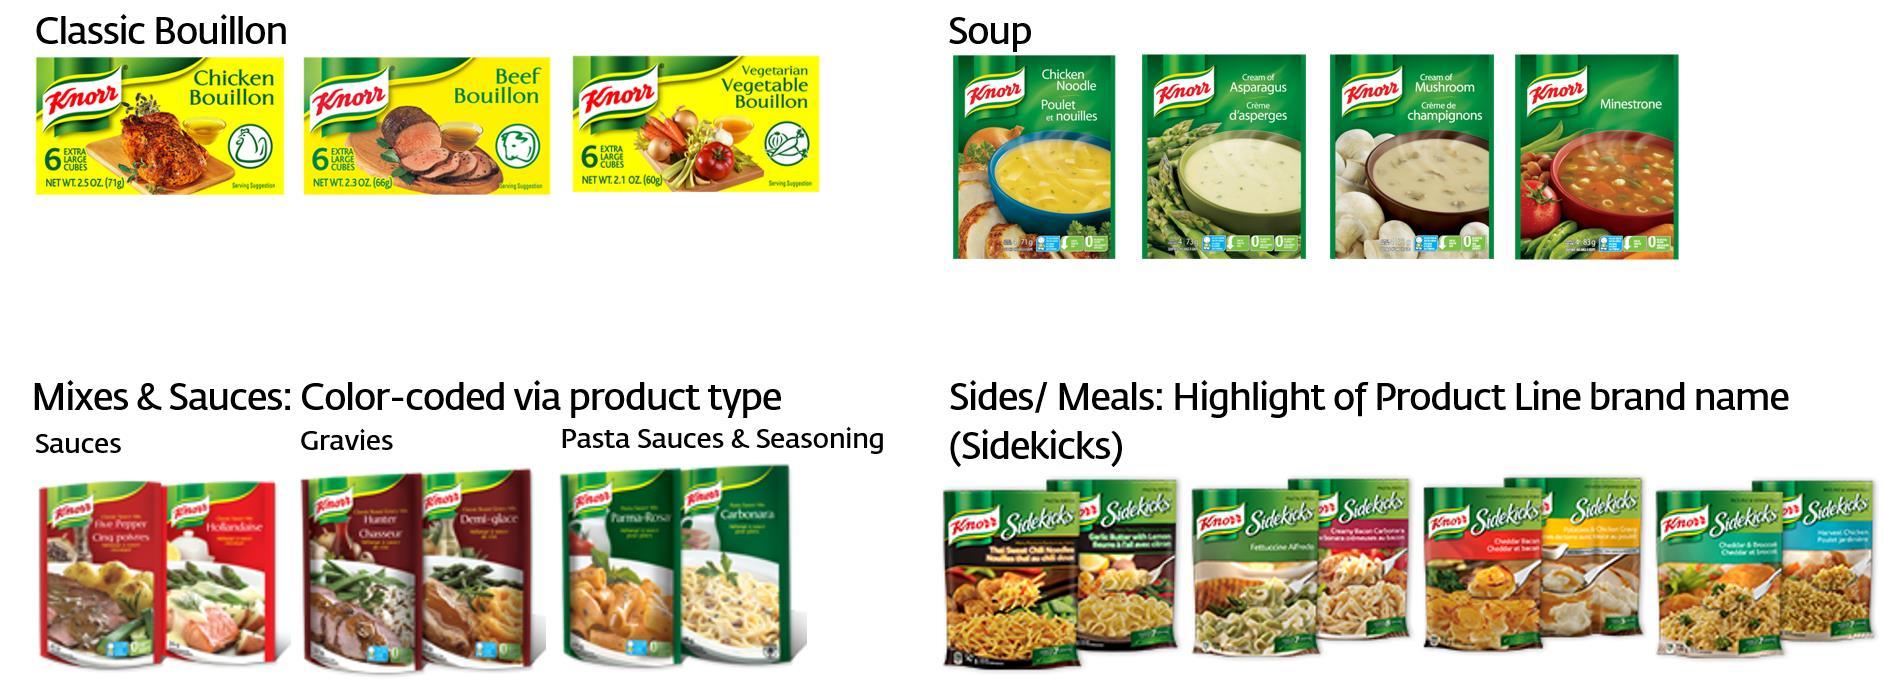 Brand architecture strategy reflected in Knorr's food products